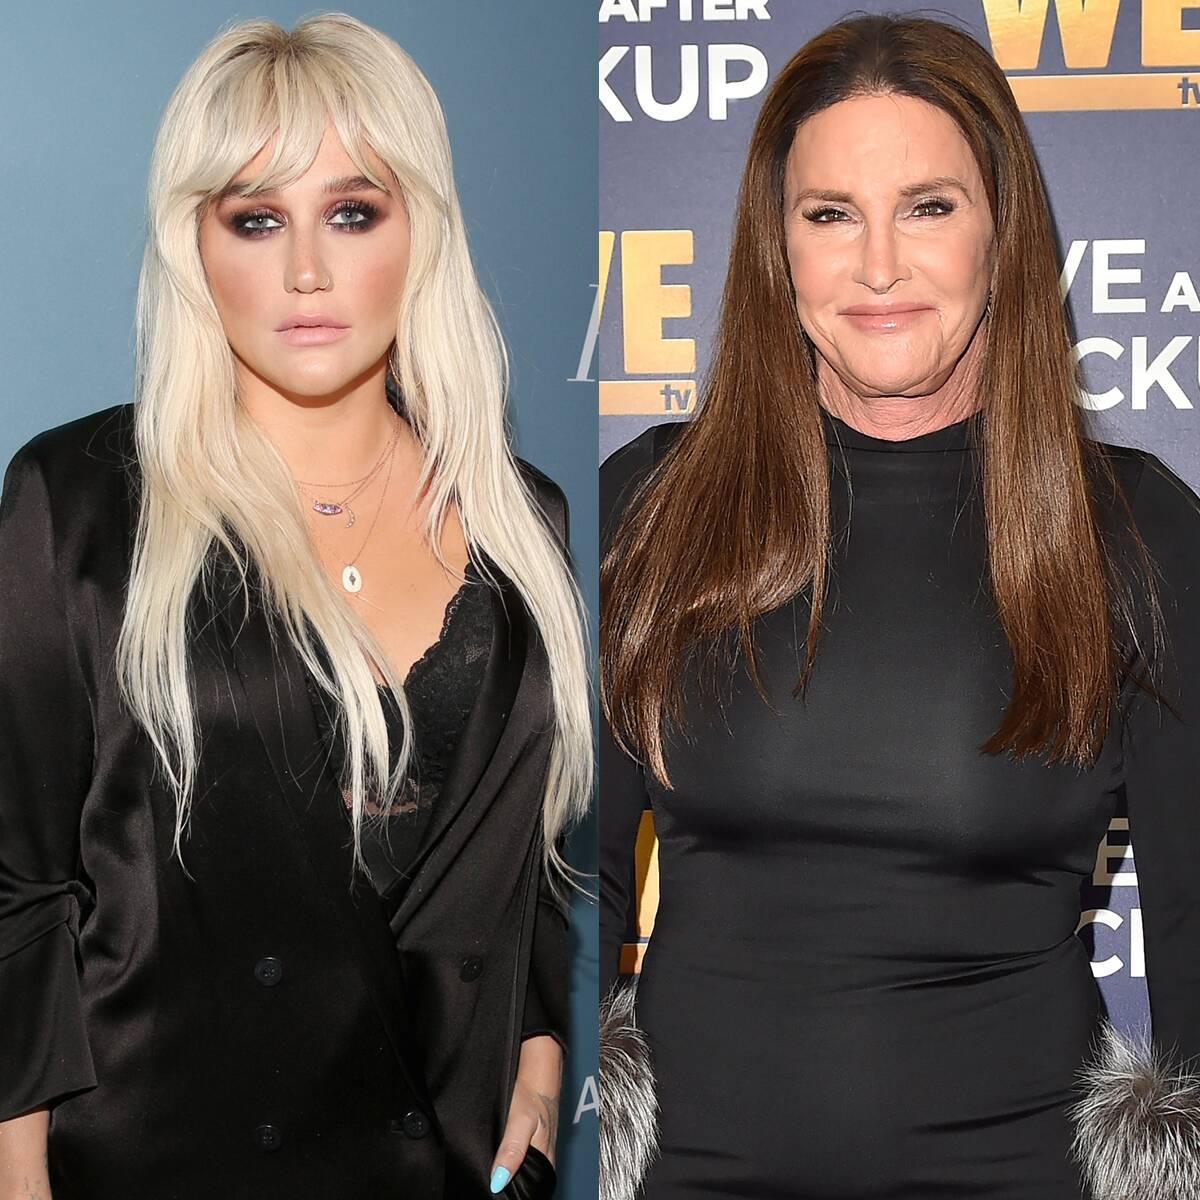 You Have to See Kesha React to Caitlyn Jenner’s “Tik Tok” Performance on The Masked Singer